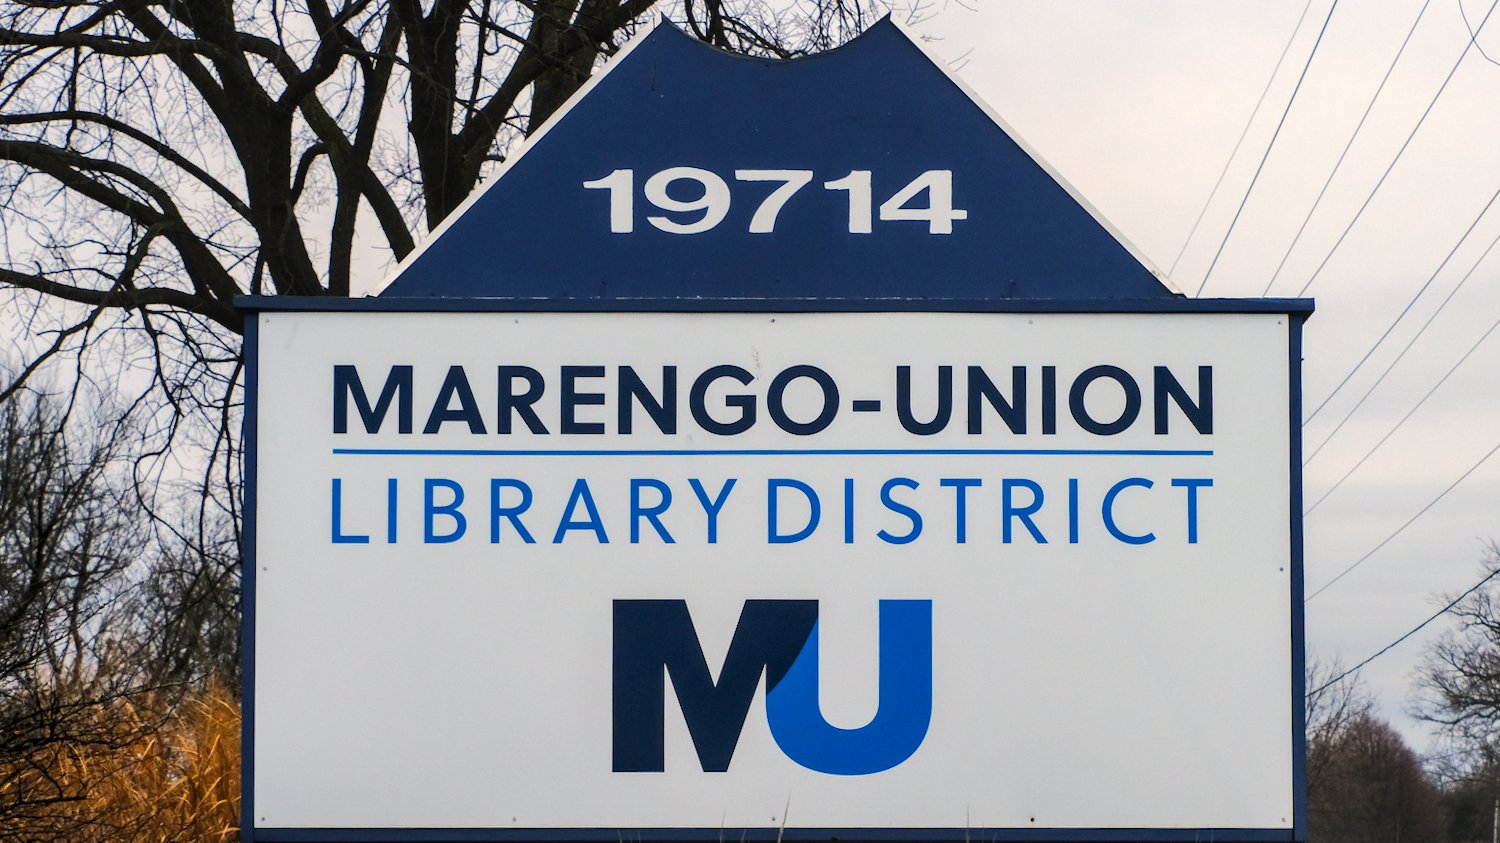 Marengo-Union Library District sign.